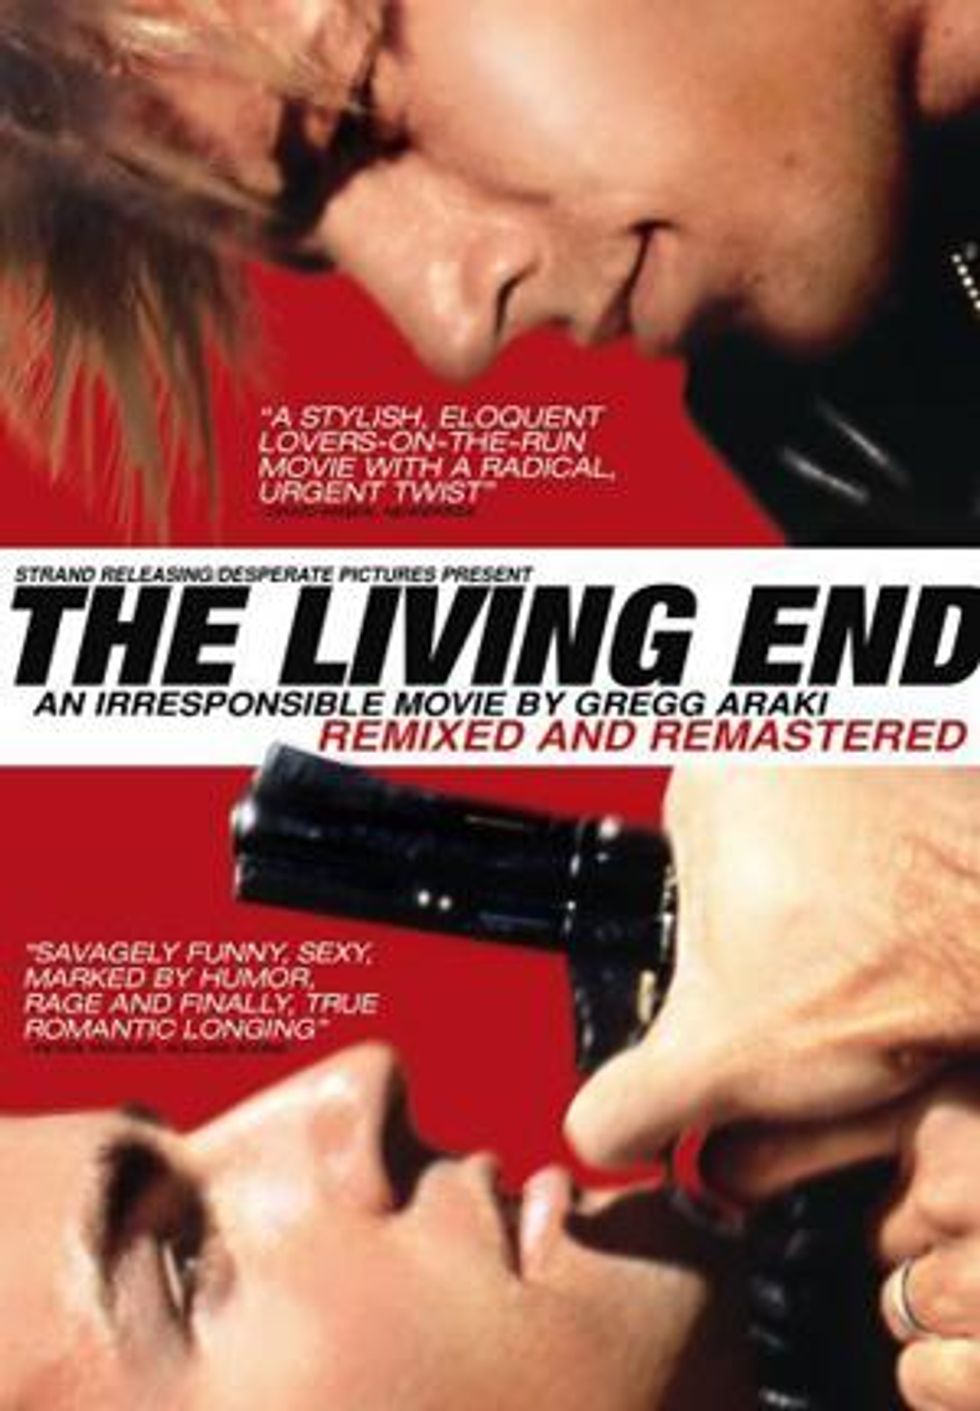 10. The Living End